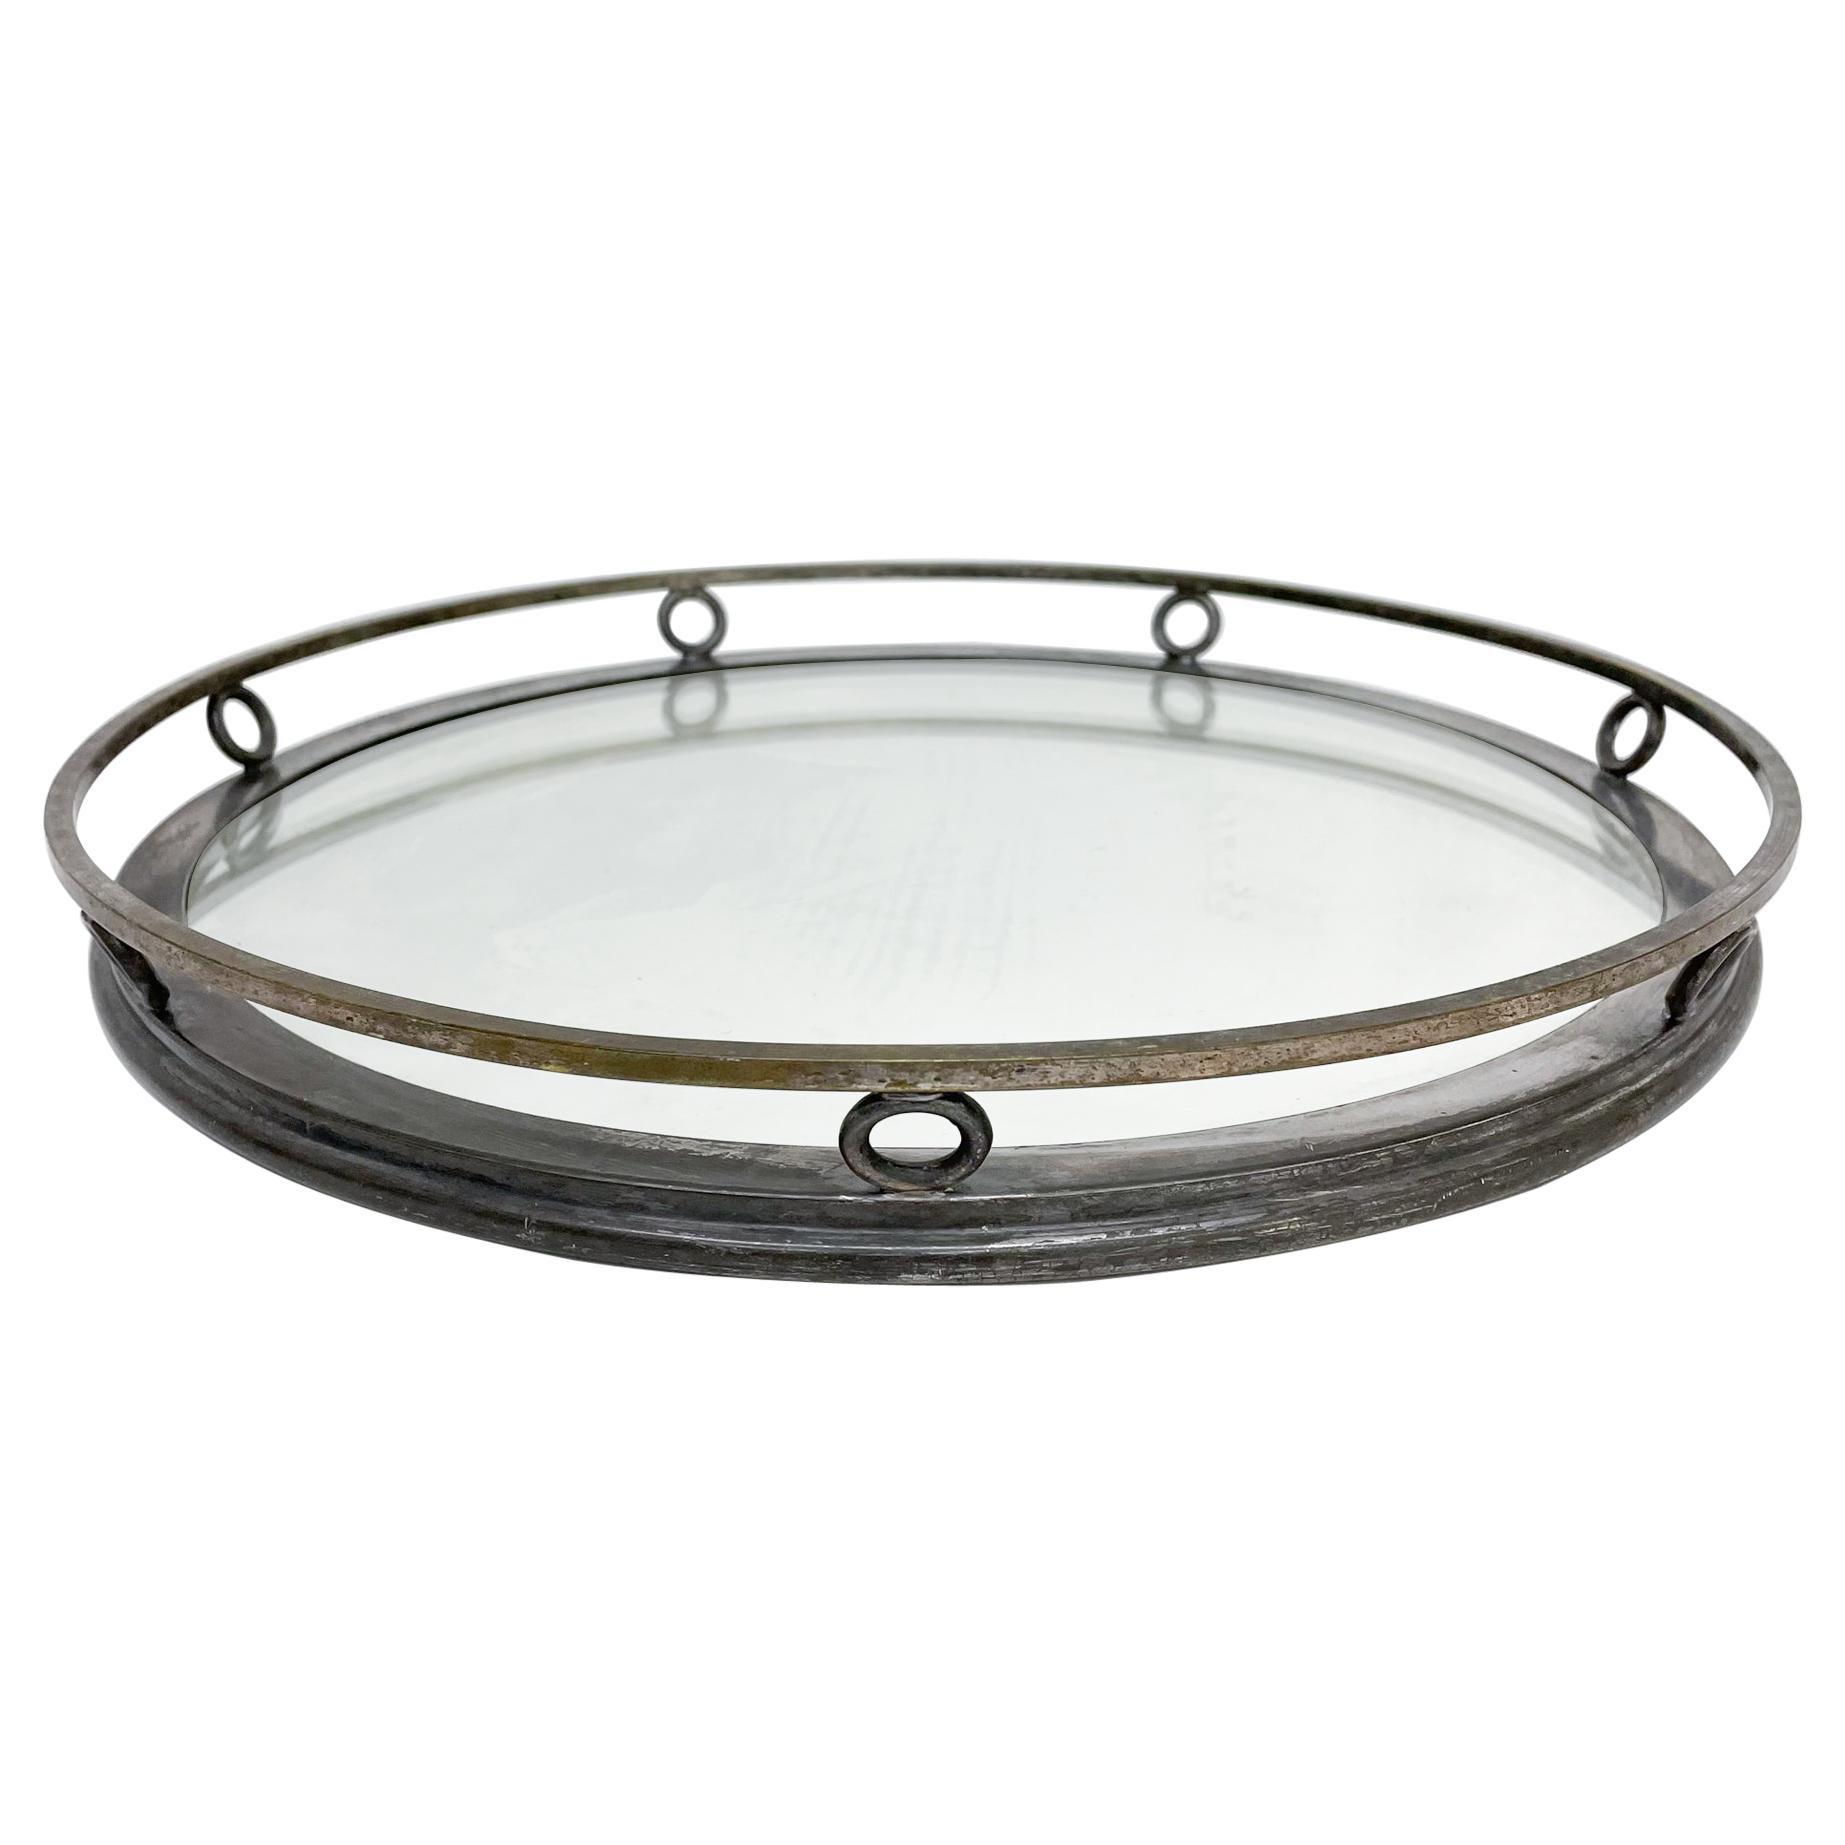 Antique Art Deco Mirrored Circular Tray with Silver Plate Trim, 1950s, USA